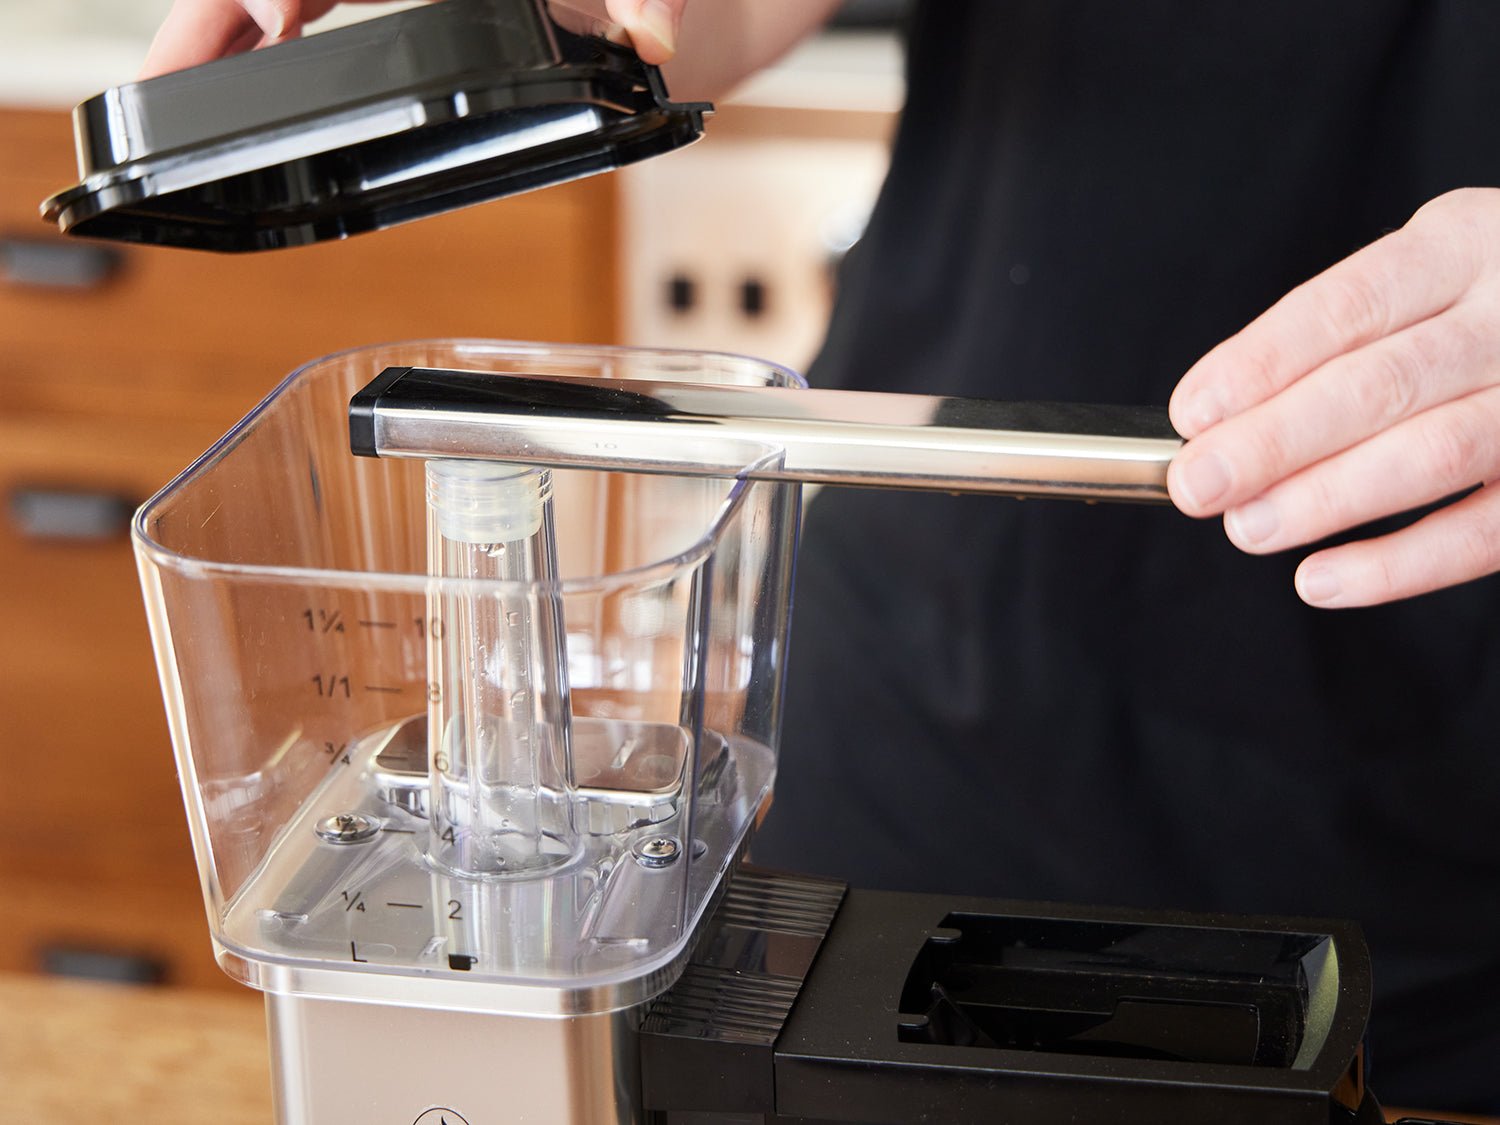 Setting Up Your Moccamaster Coffee Brewer